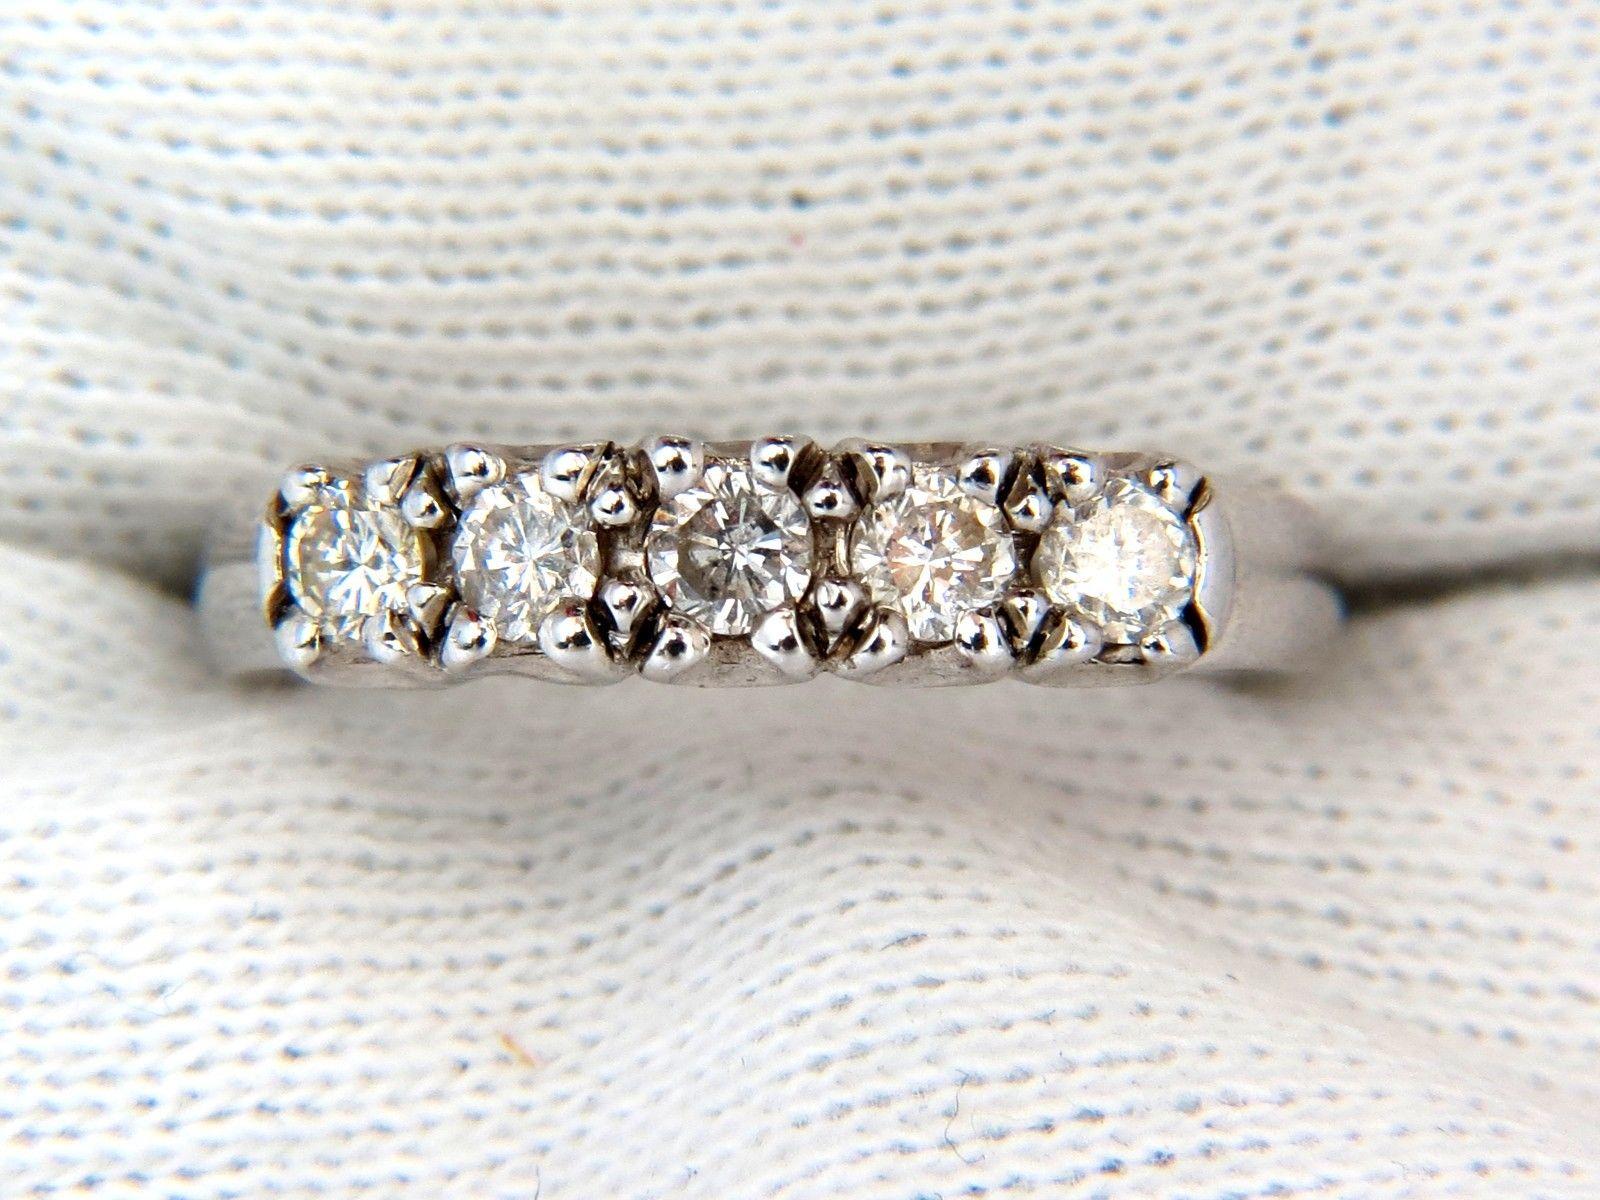 Modern Band

.55ct. Round diamonds

H-color Vs-2 clarity

4.21mm wide

 size: 6

3.9 grams

can resize, please inquire

$2500 appraisal will accompany